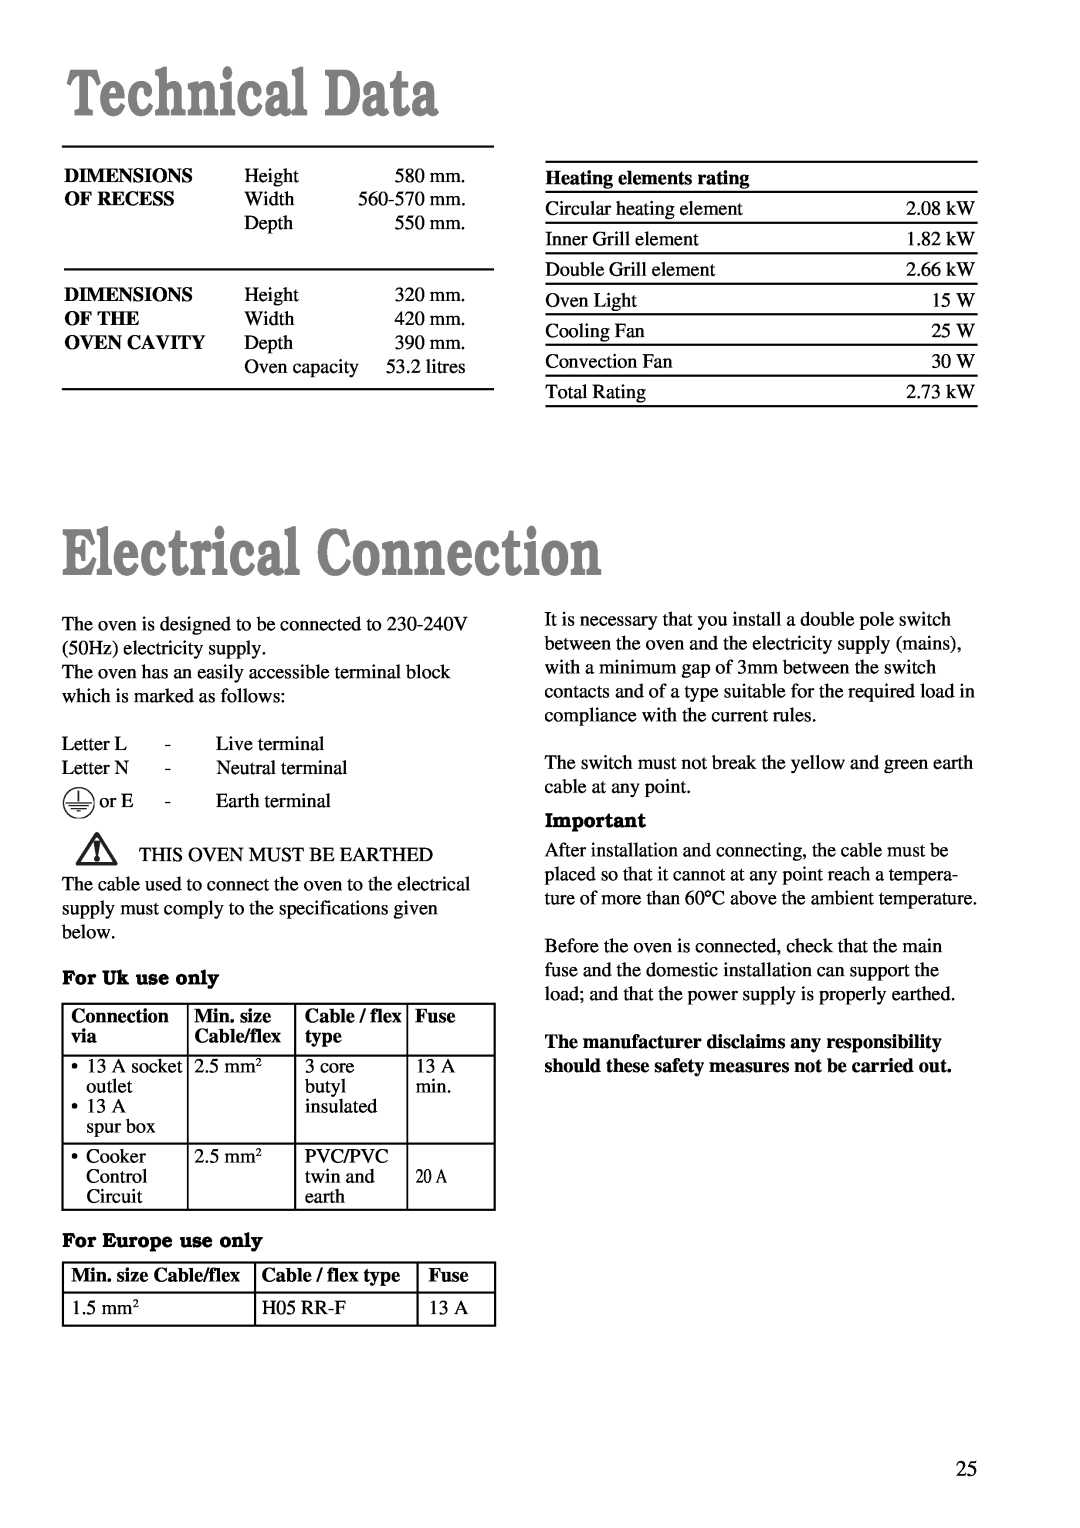 Tricity Bendix TBS 605 Technical Data, Electrical Connection, Dimensions, Of Recess, Of The, Oven Cavity, For Uk use only 